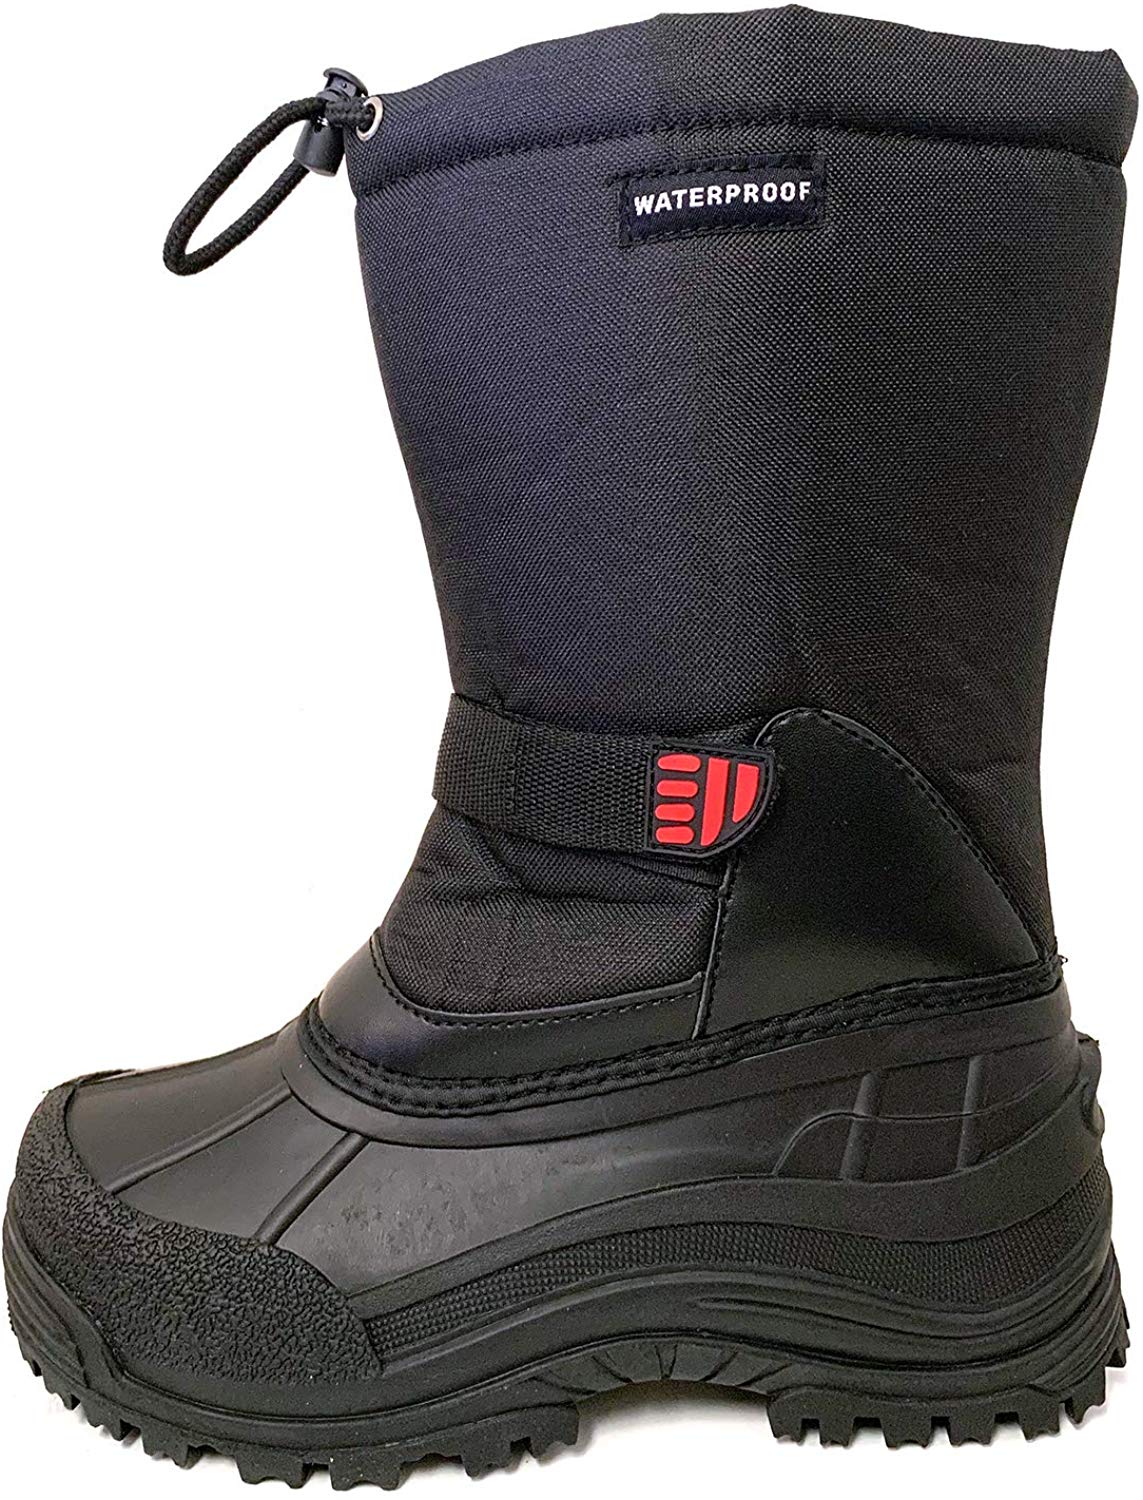 Men's Snow Boots - image 3 of 5